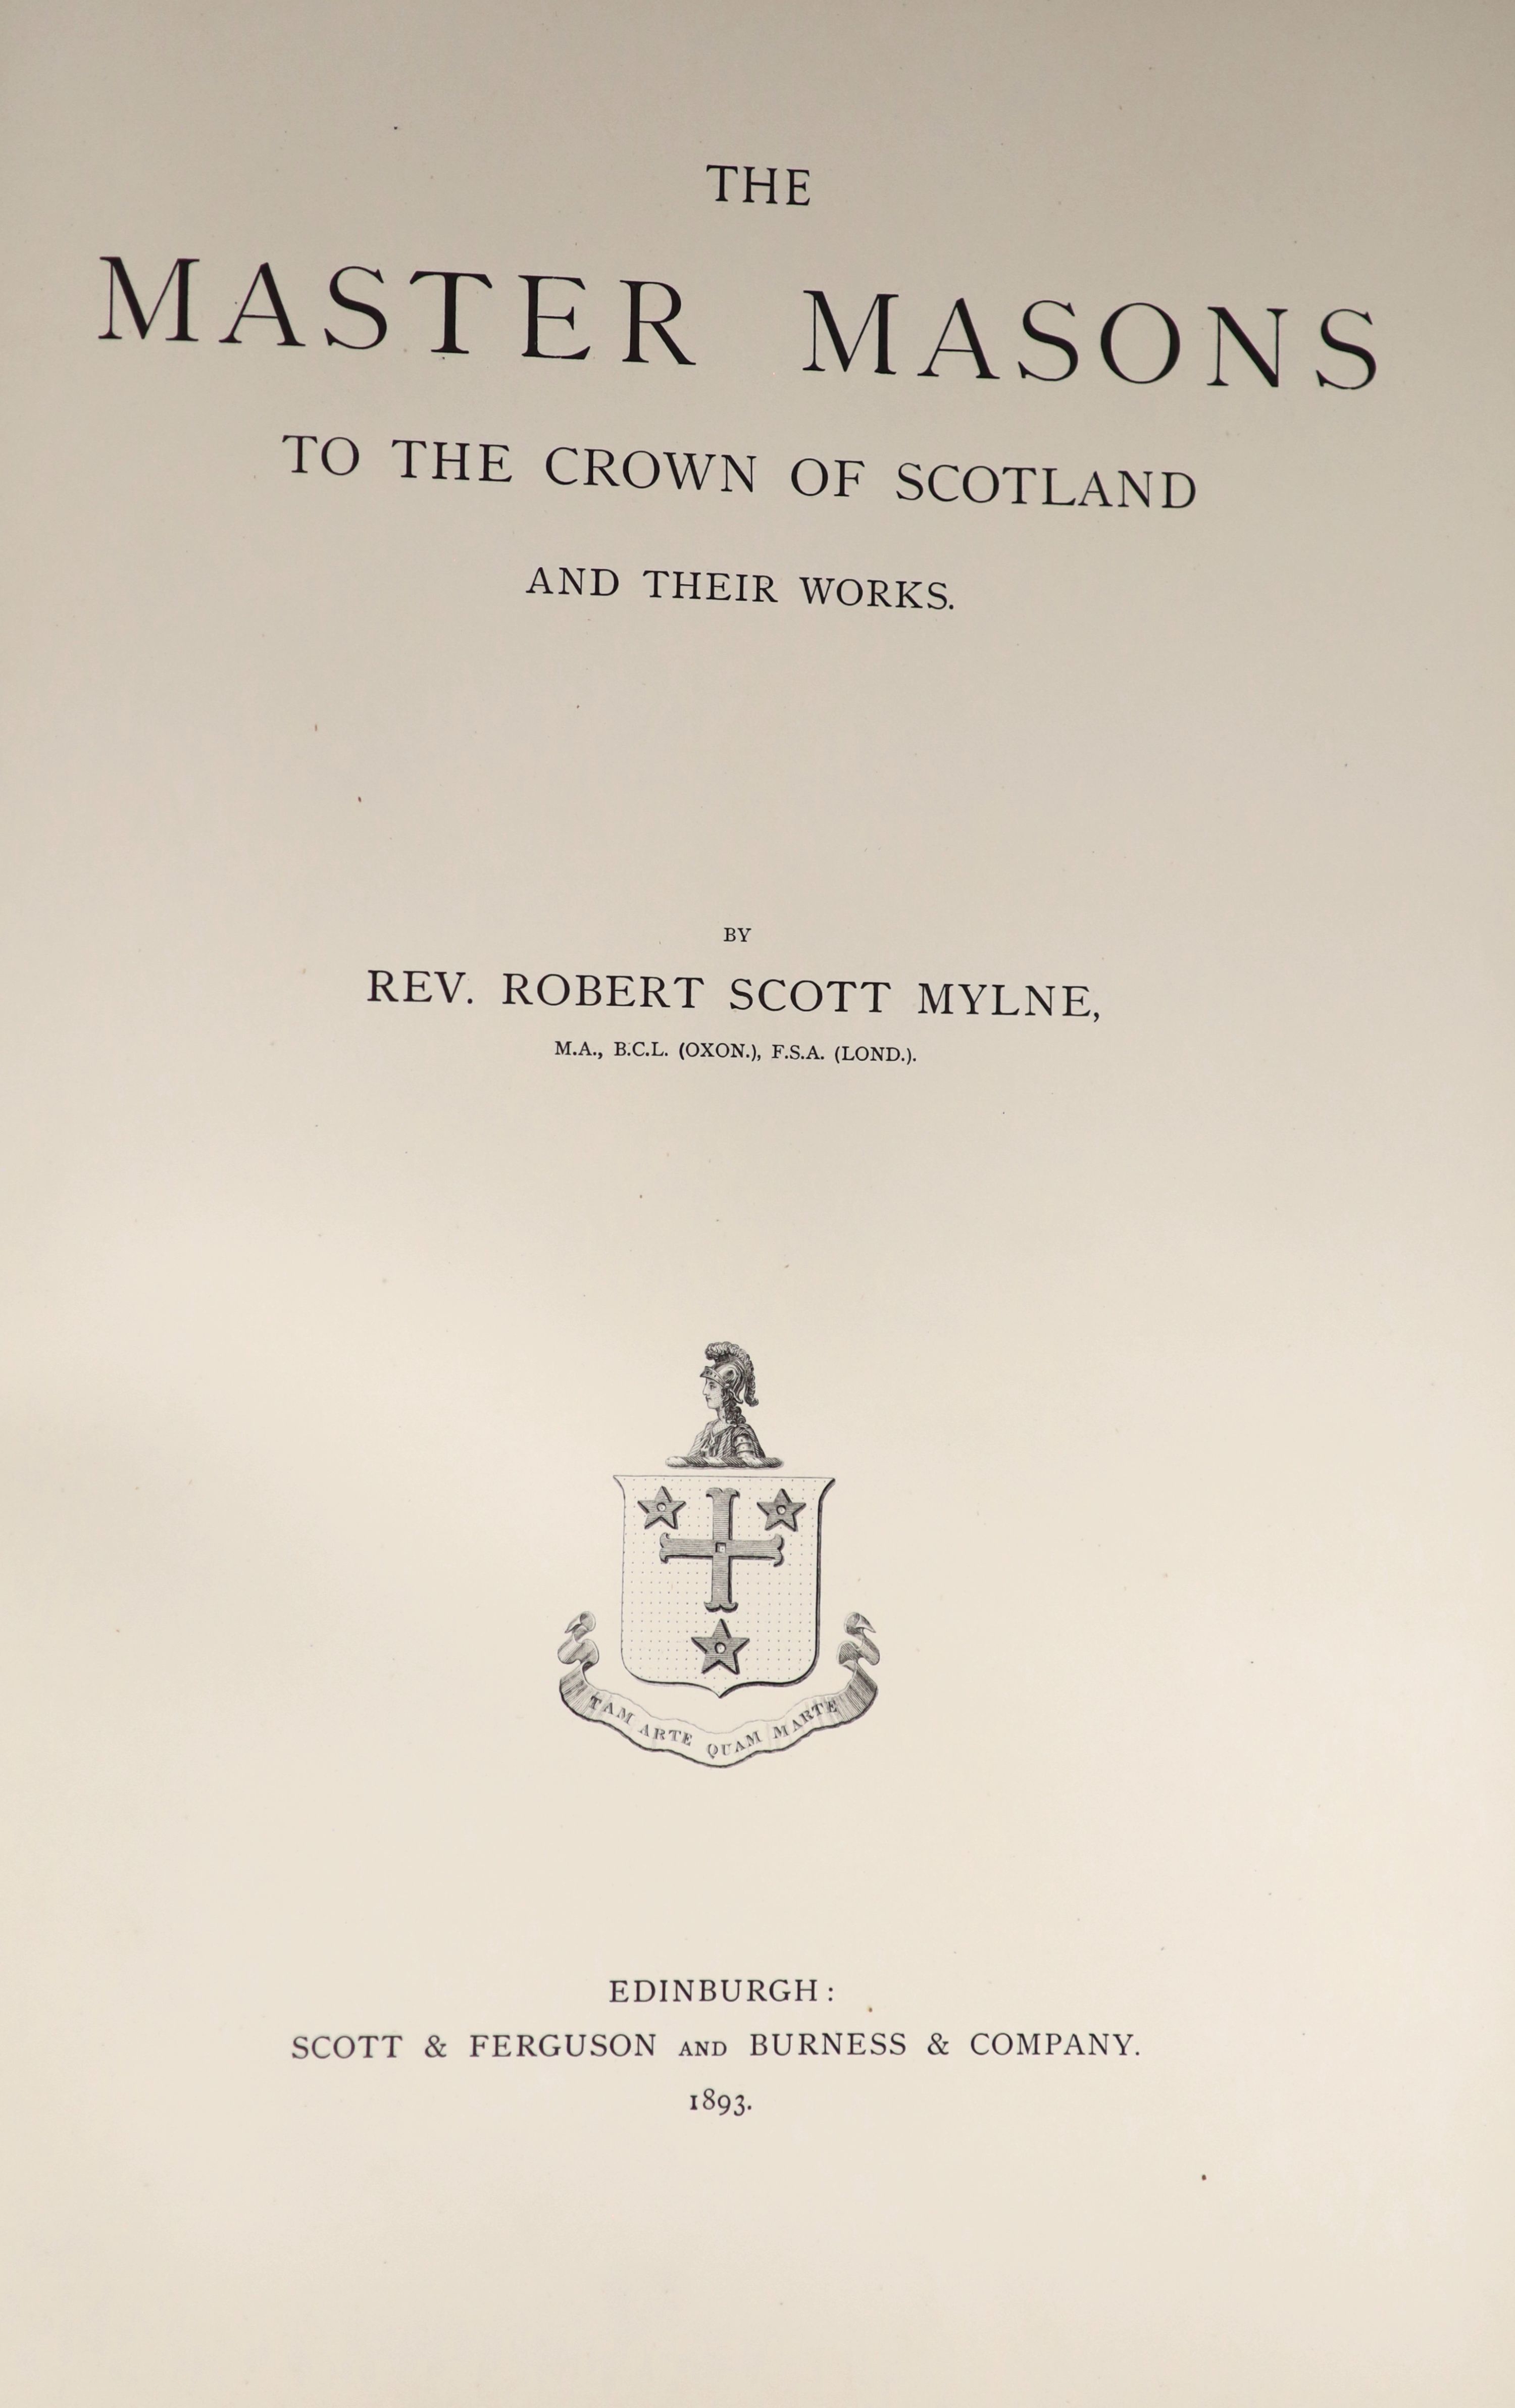 Mylne, Rev. Robert Scott. The Master Masons of the Crown of Scotland and their Works, limited edition, numerous plates incl. d-page and folded plans) and text illus.; gilt lettered and decorated buckram, 4to, Edinburgh 1